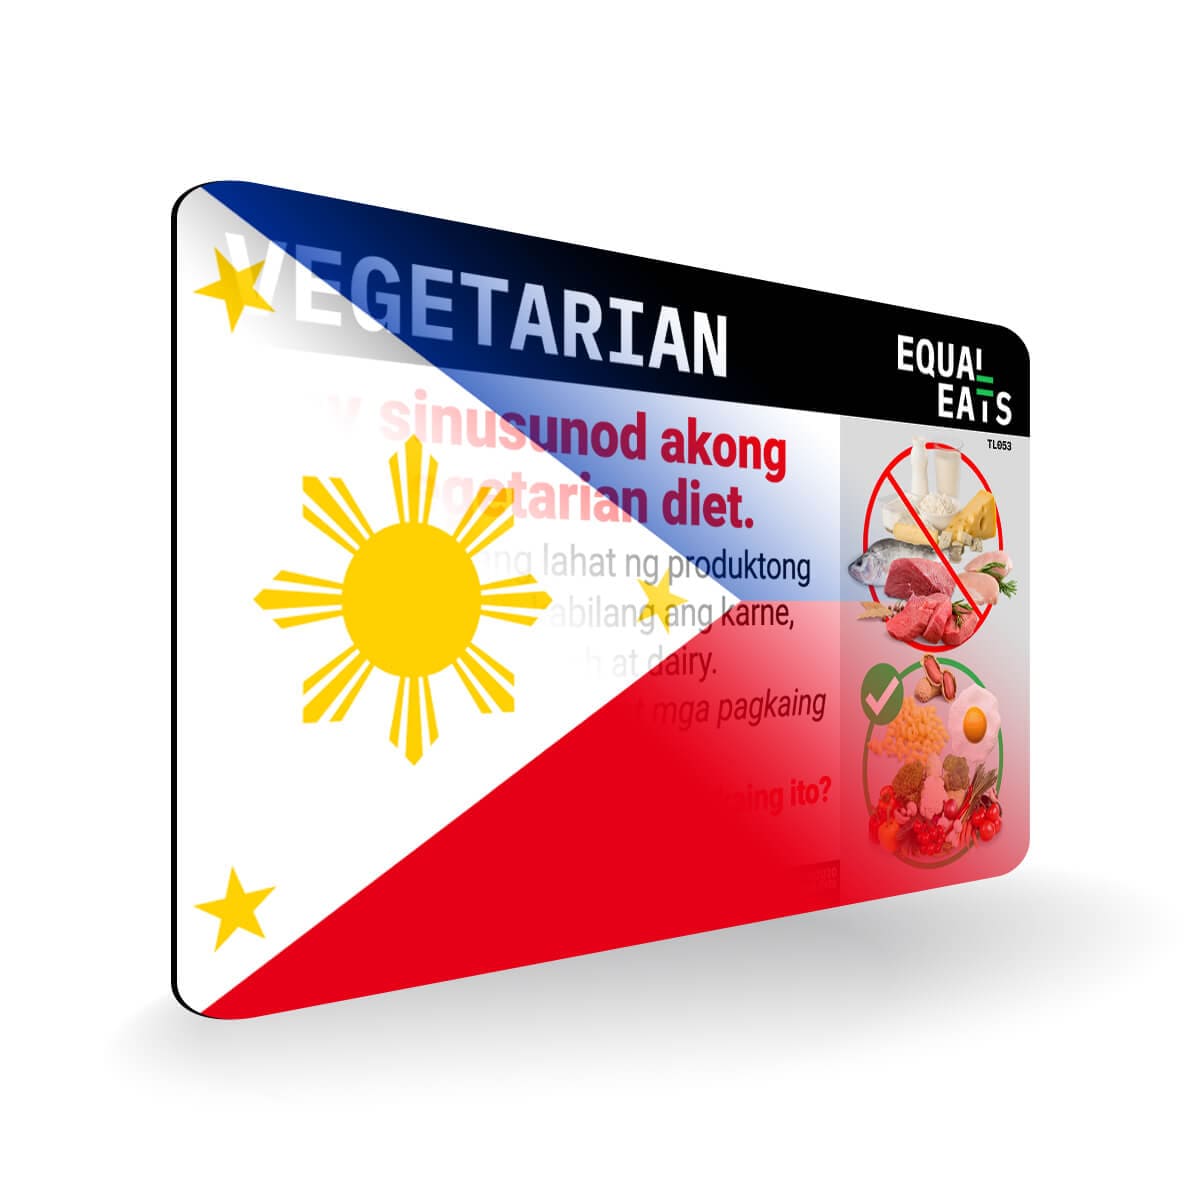 Ovo Vegetarian in Tagalog. Card for Vegetarian in Philippines